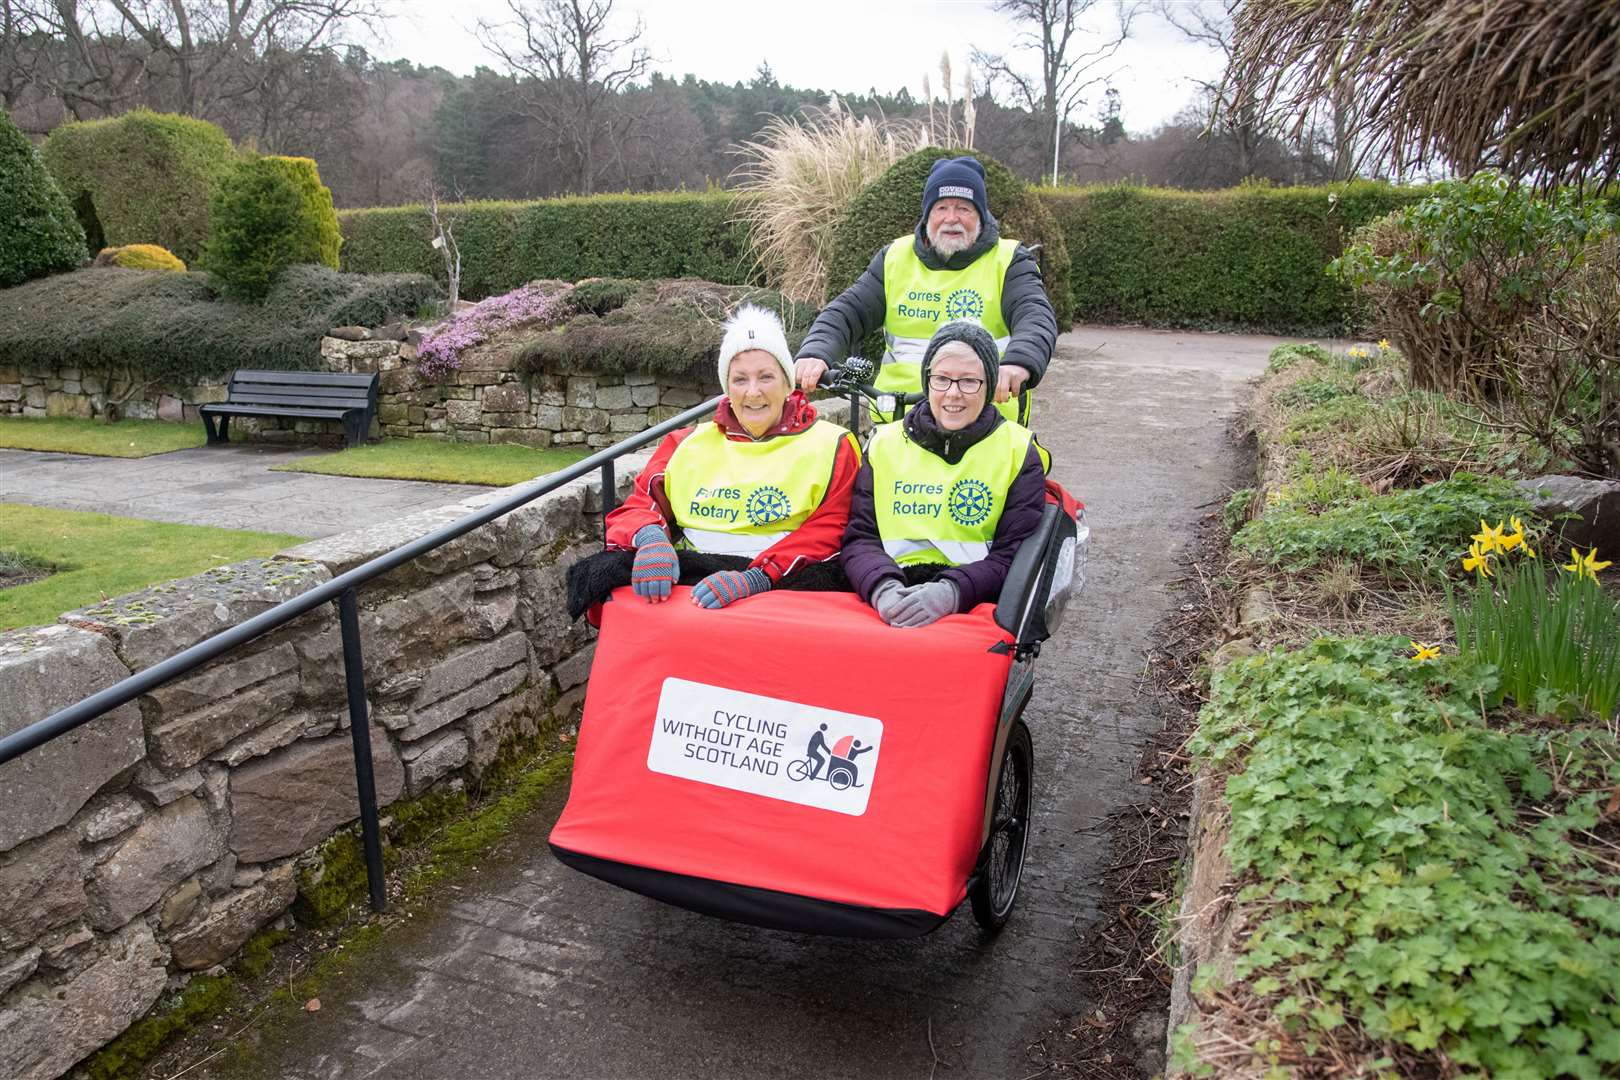 EL_Forres Rotary Trishaw 02The Forres Rotary Club's Jim McPherson (cycling) and Sheena MacGillivray (left) and Suzie De-Vry (right) take a ride on the Cycling Without Age Scotland Trishaw around the sunken garden in Forres. Picture: Daniel Forsyth.